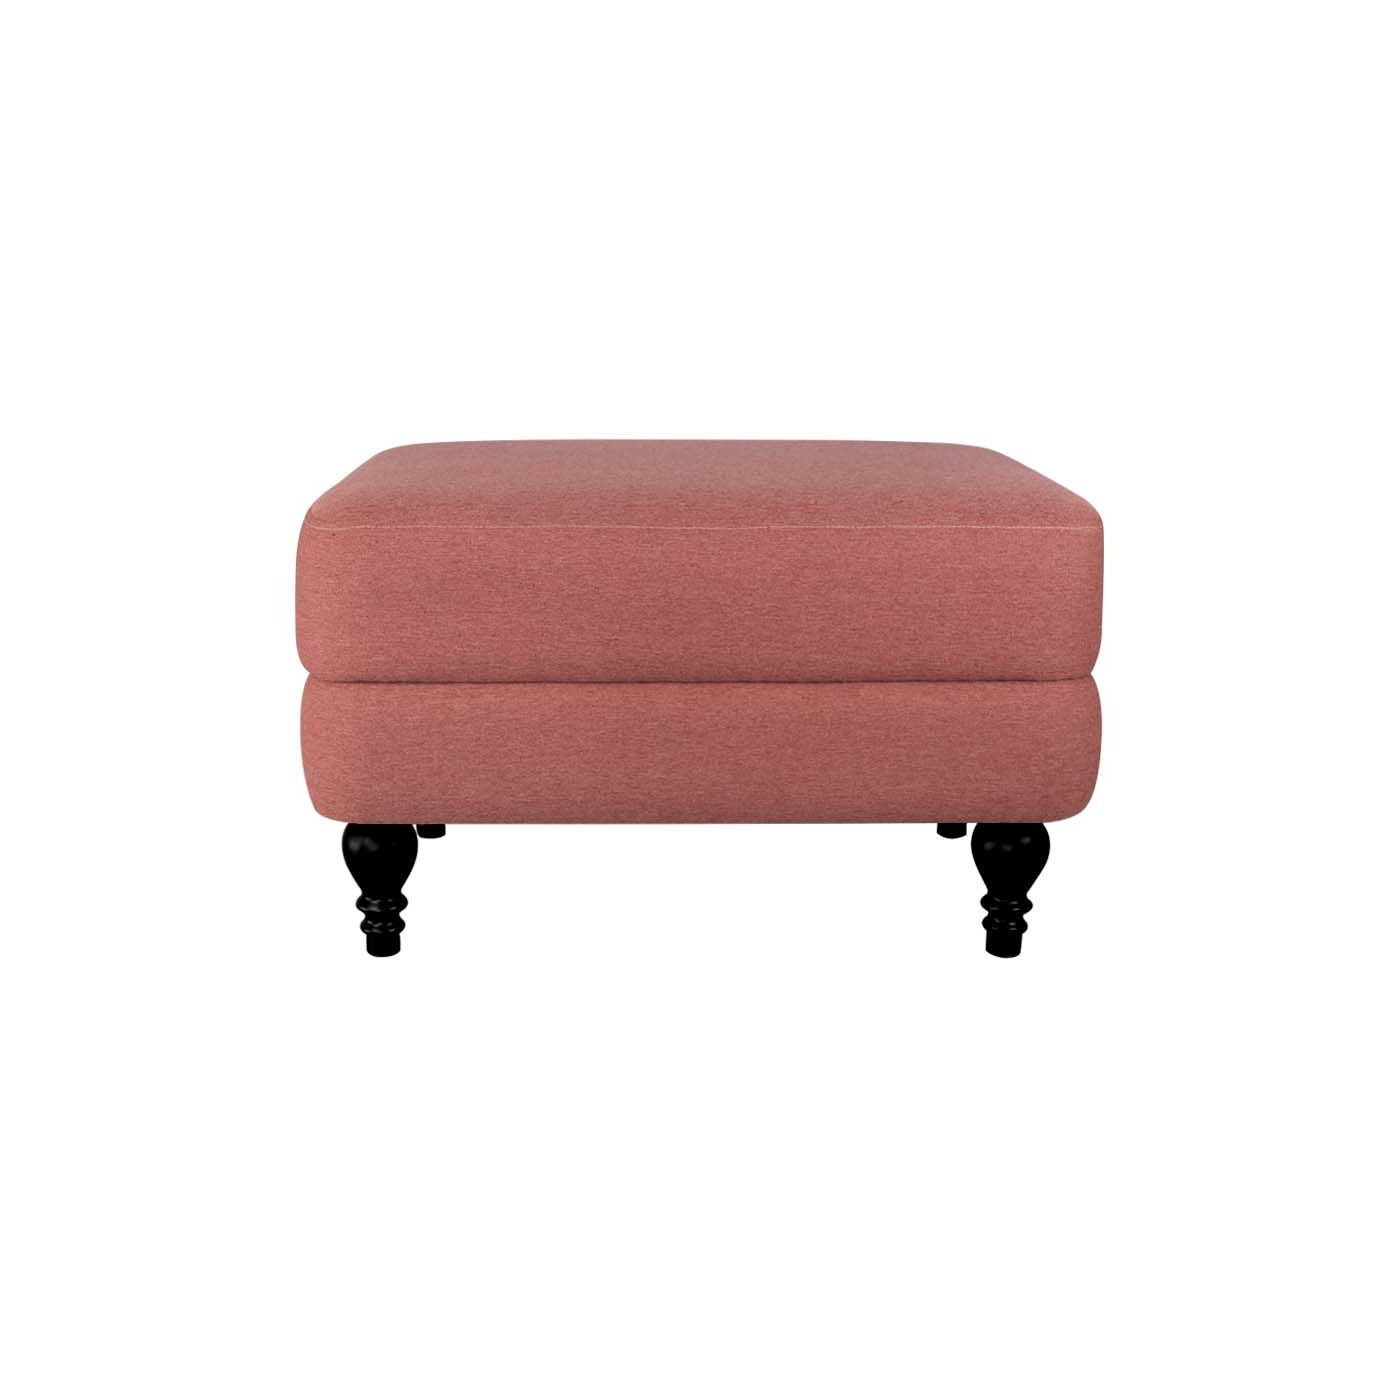 Famous Dark Red And Cream Woven Pouf Ottomans Regarding Rosewall Red Black Ottoman (View 7 of 10)